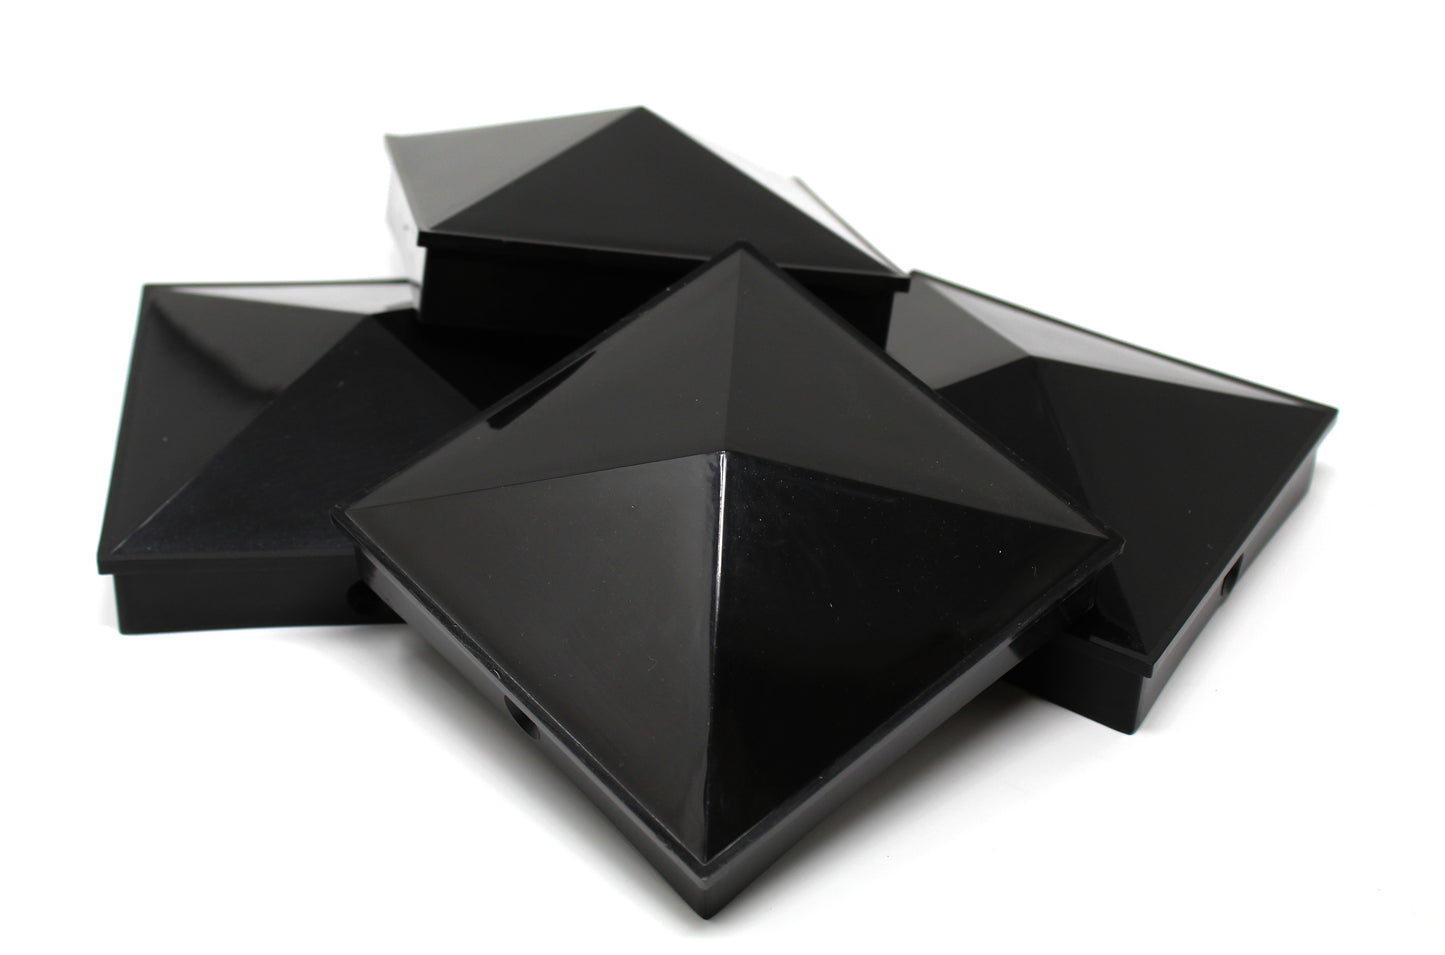 4x4 Nominal (3-5/8"x3-5/8") Plastic Pyramid Fence Post Caps with Pre-Drilled Hole Black or White